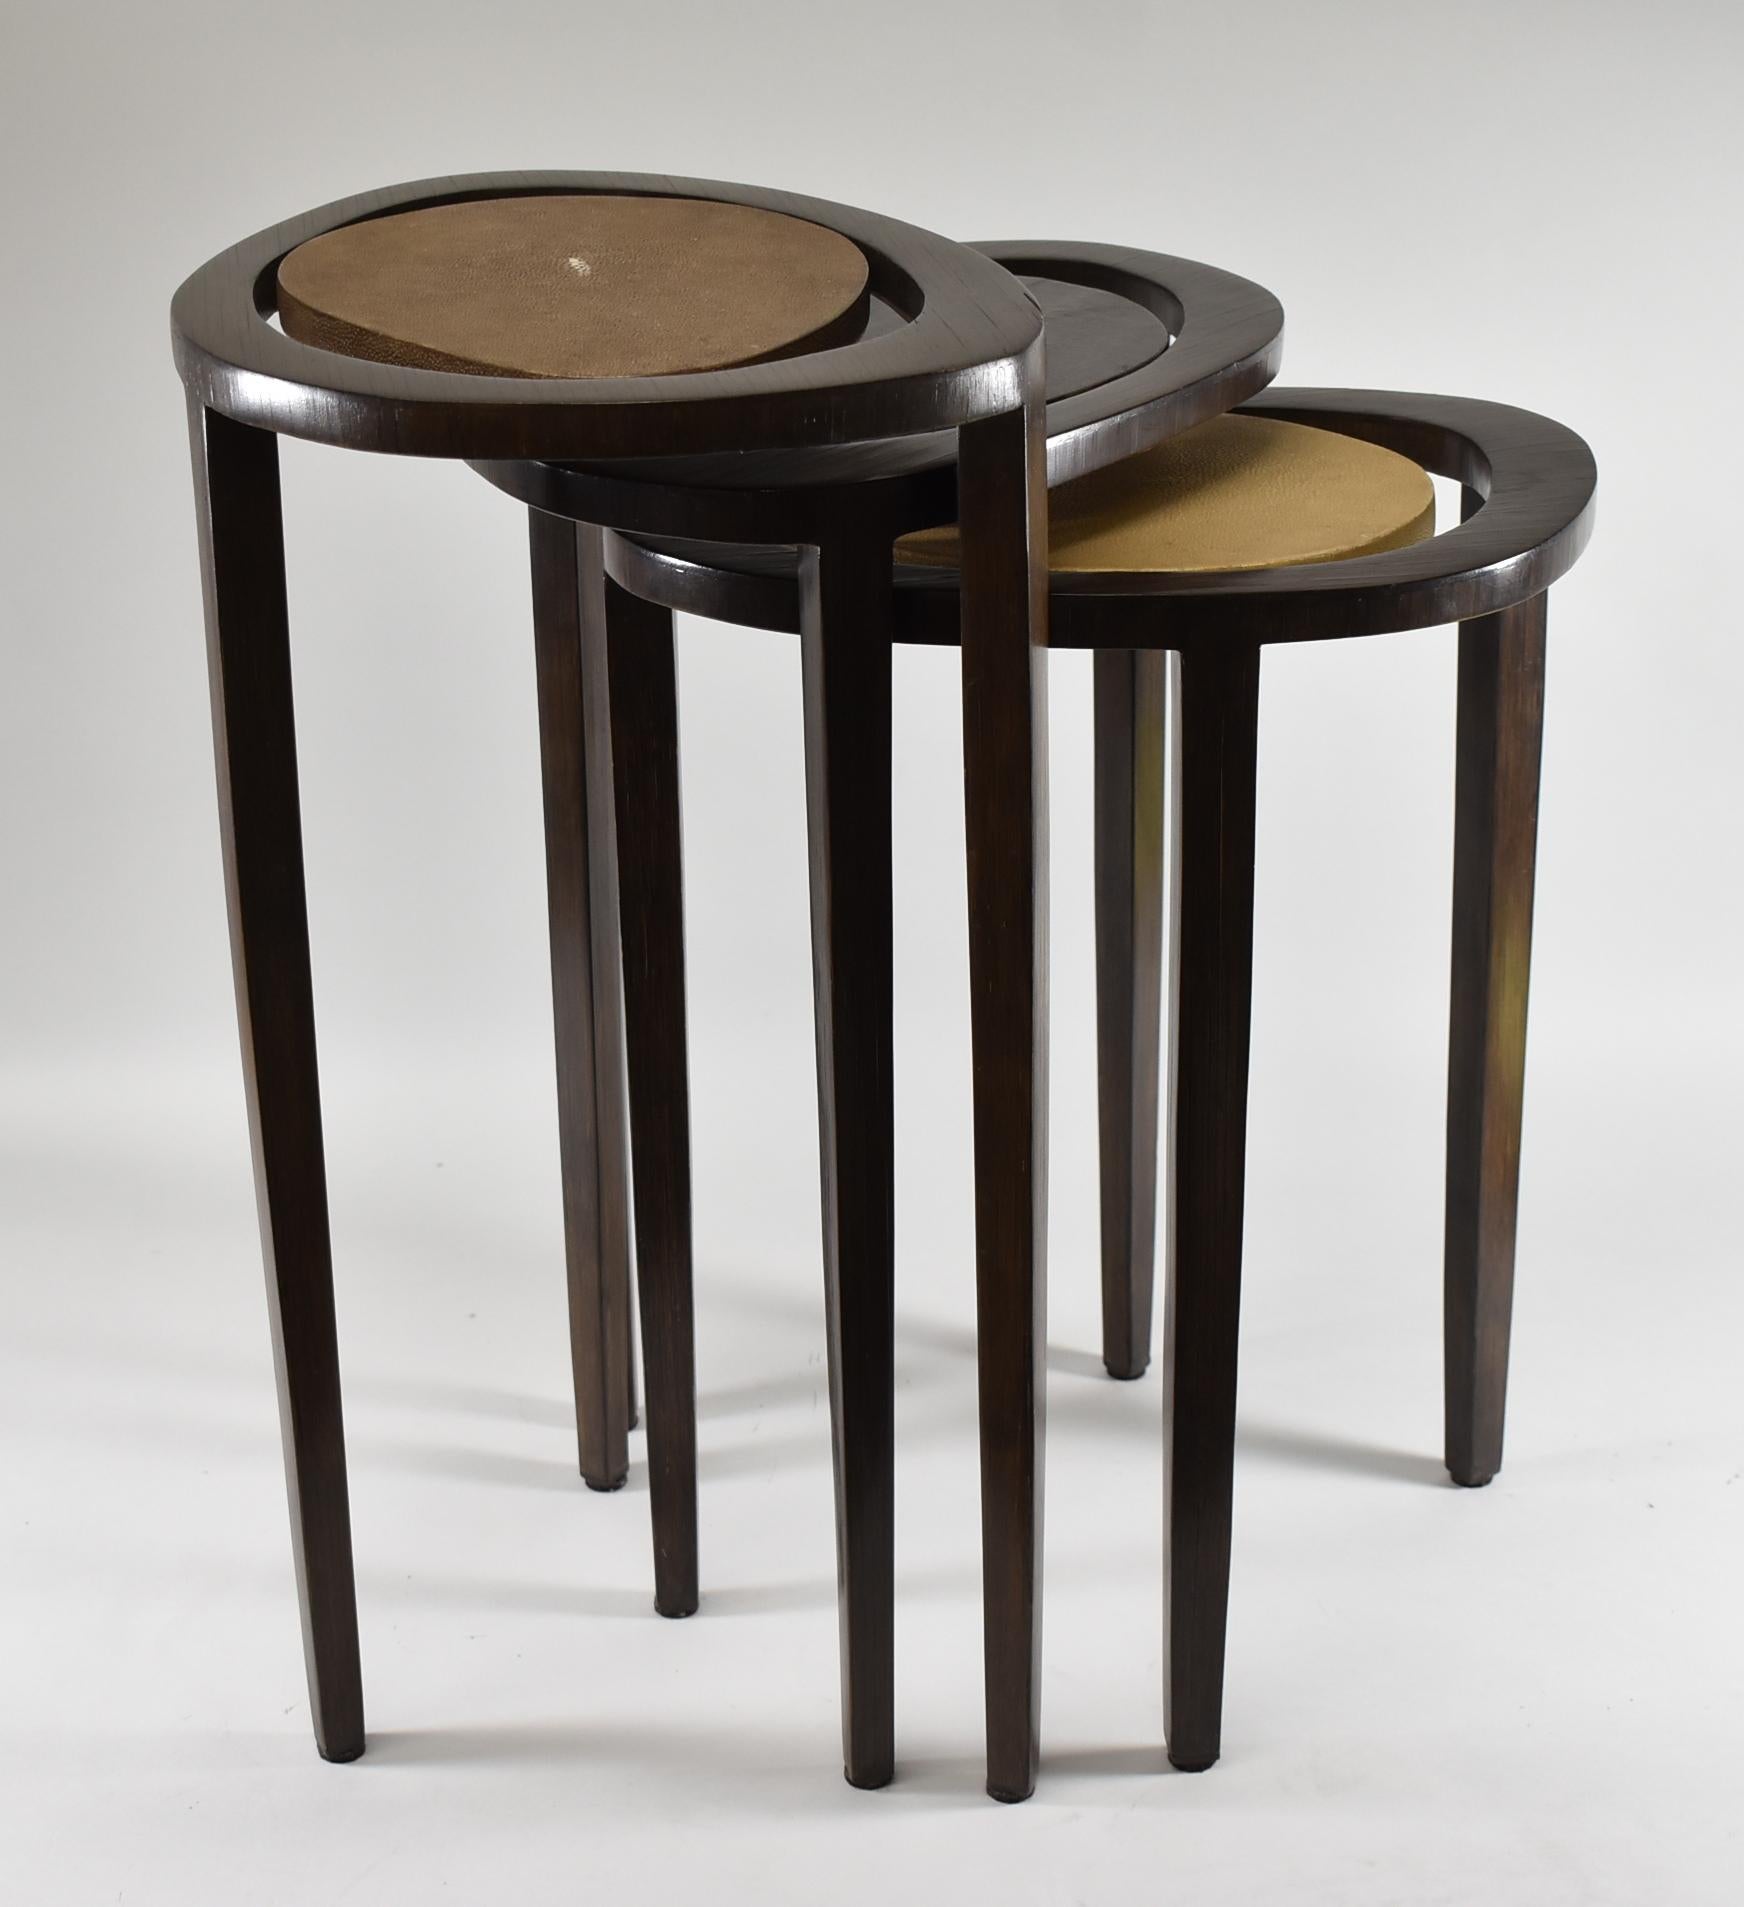 Rosewood and shagreen set of three nesting tables by R&Y Augusti Paris. Free form styled elliptical tops with floating surfaces. Very nice to excellent condition. Dimensions: 14.75